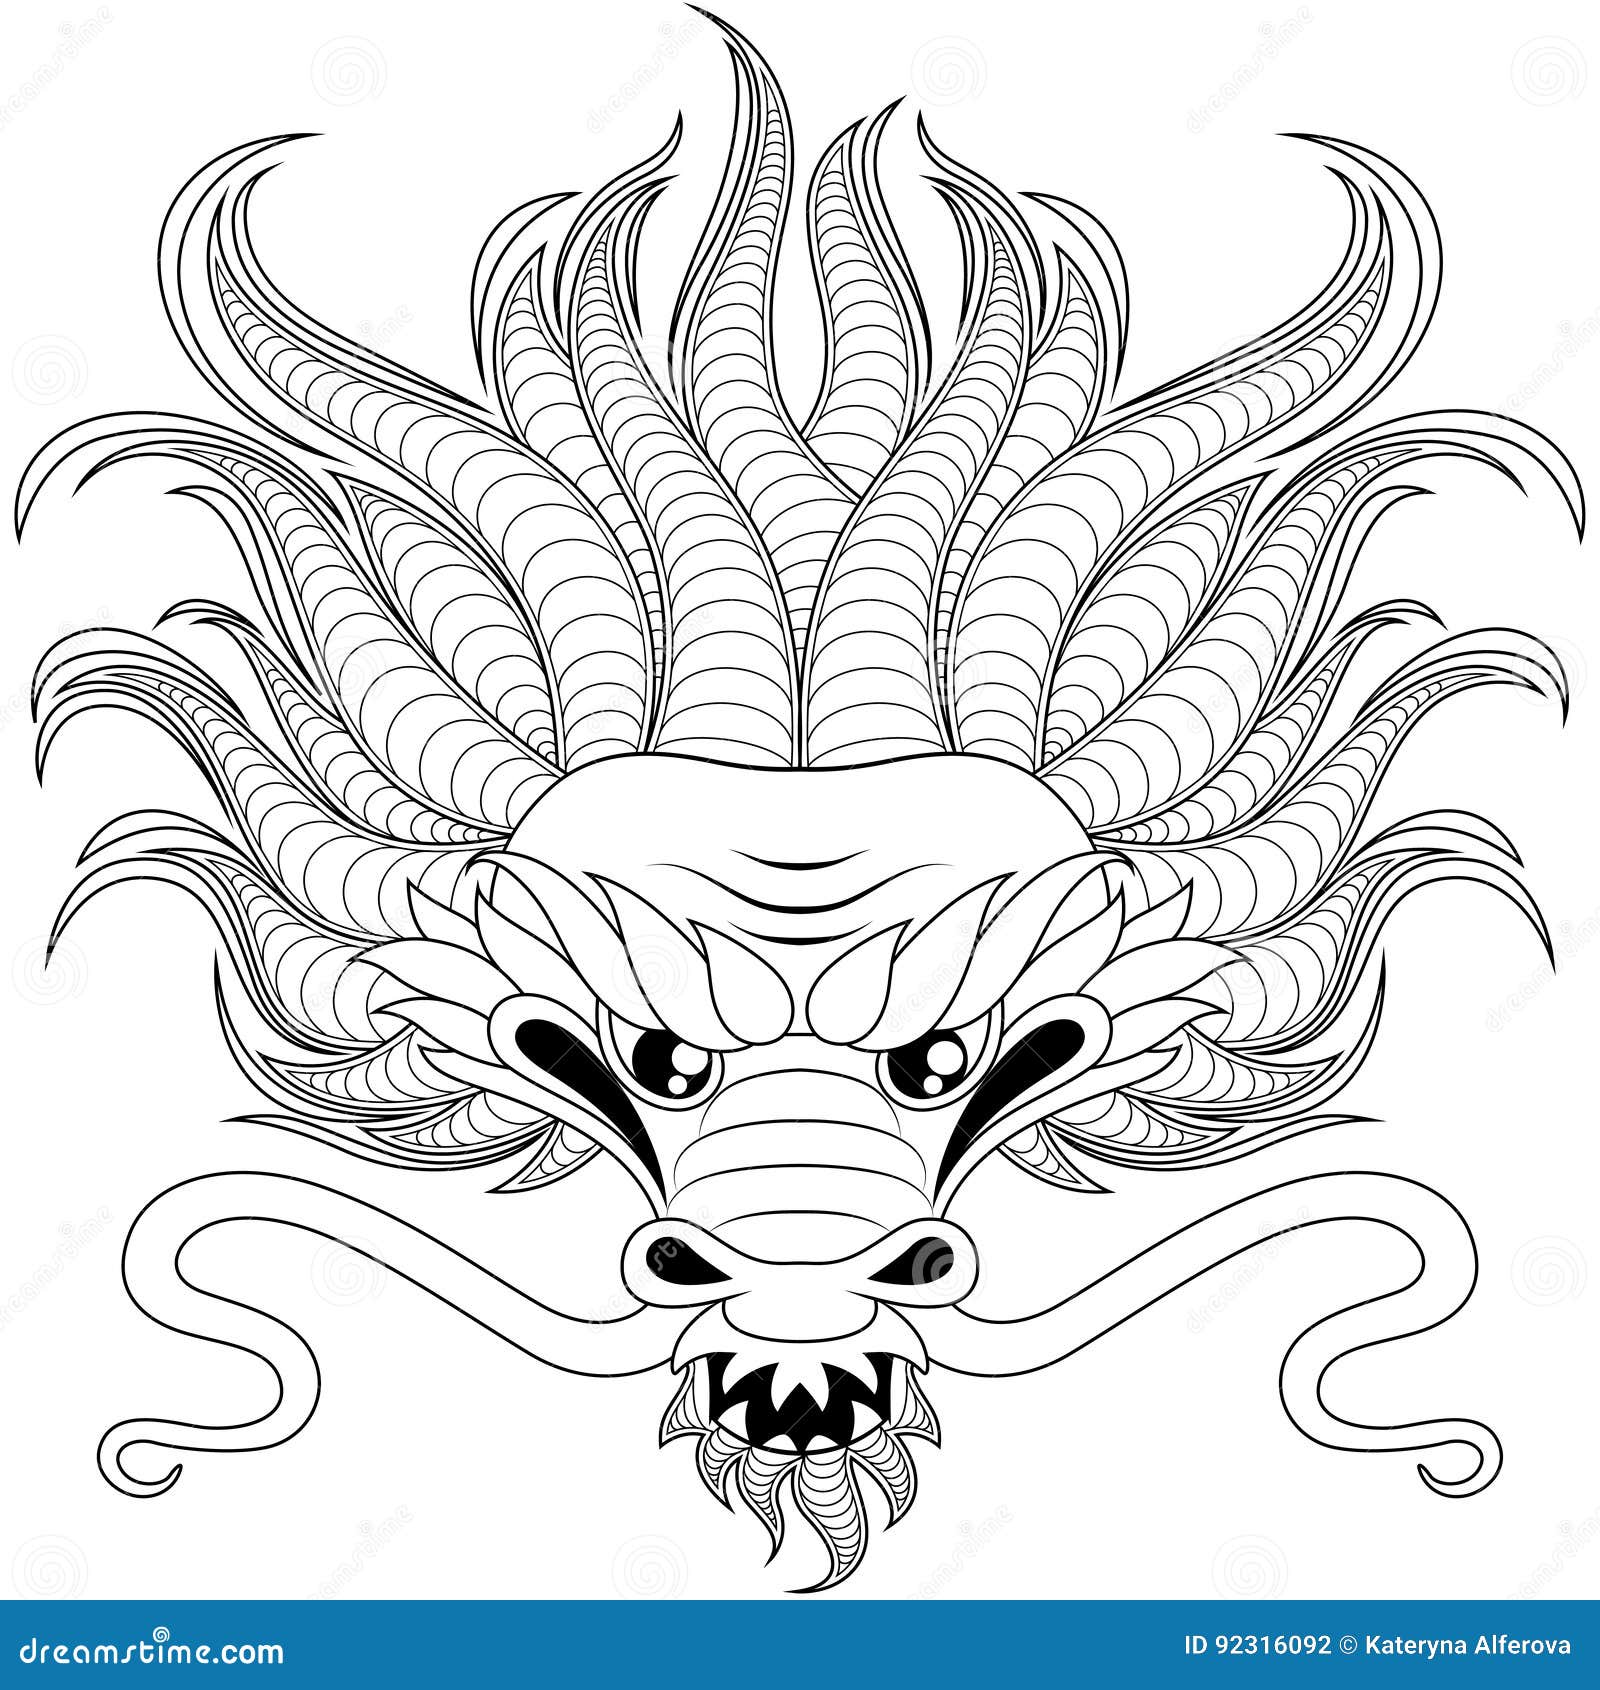 head of chinese dragon in zentangle style for tatoo. adult antistress coloring page. black and white hand drawn doodle for colorin